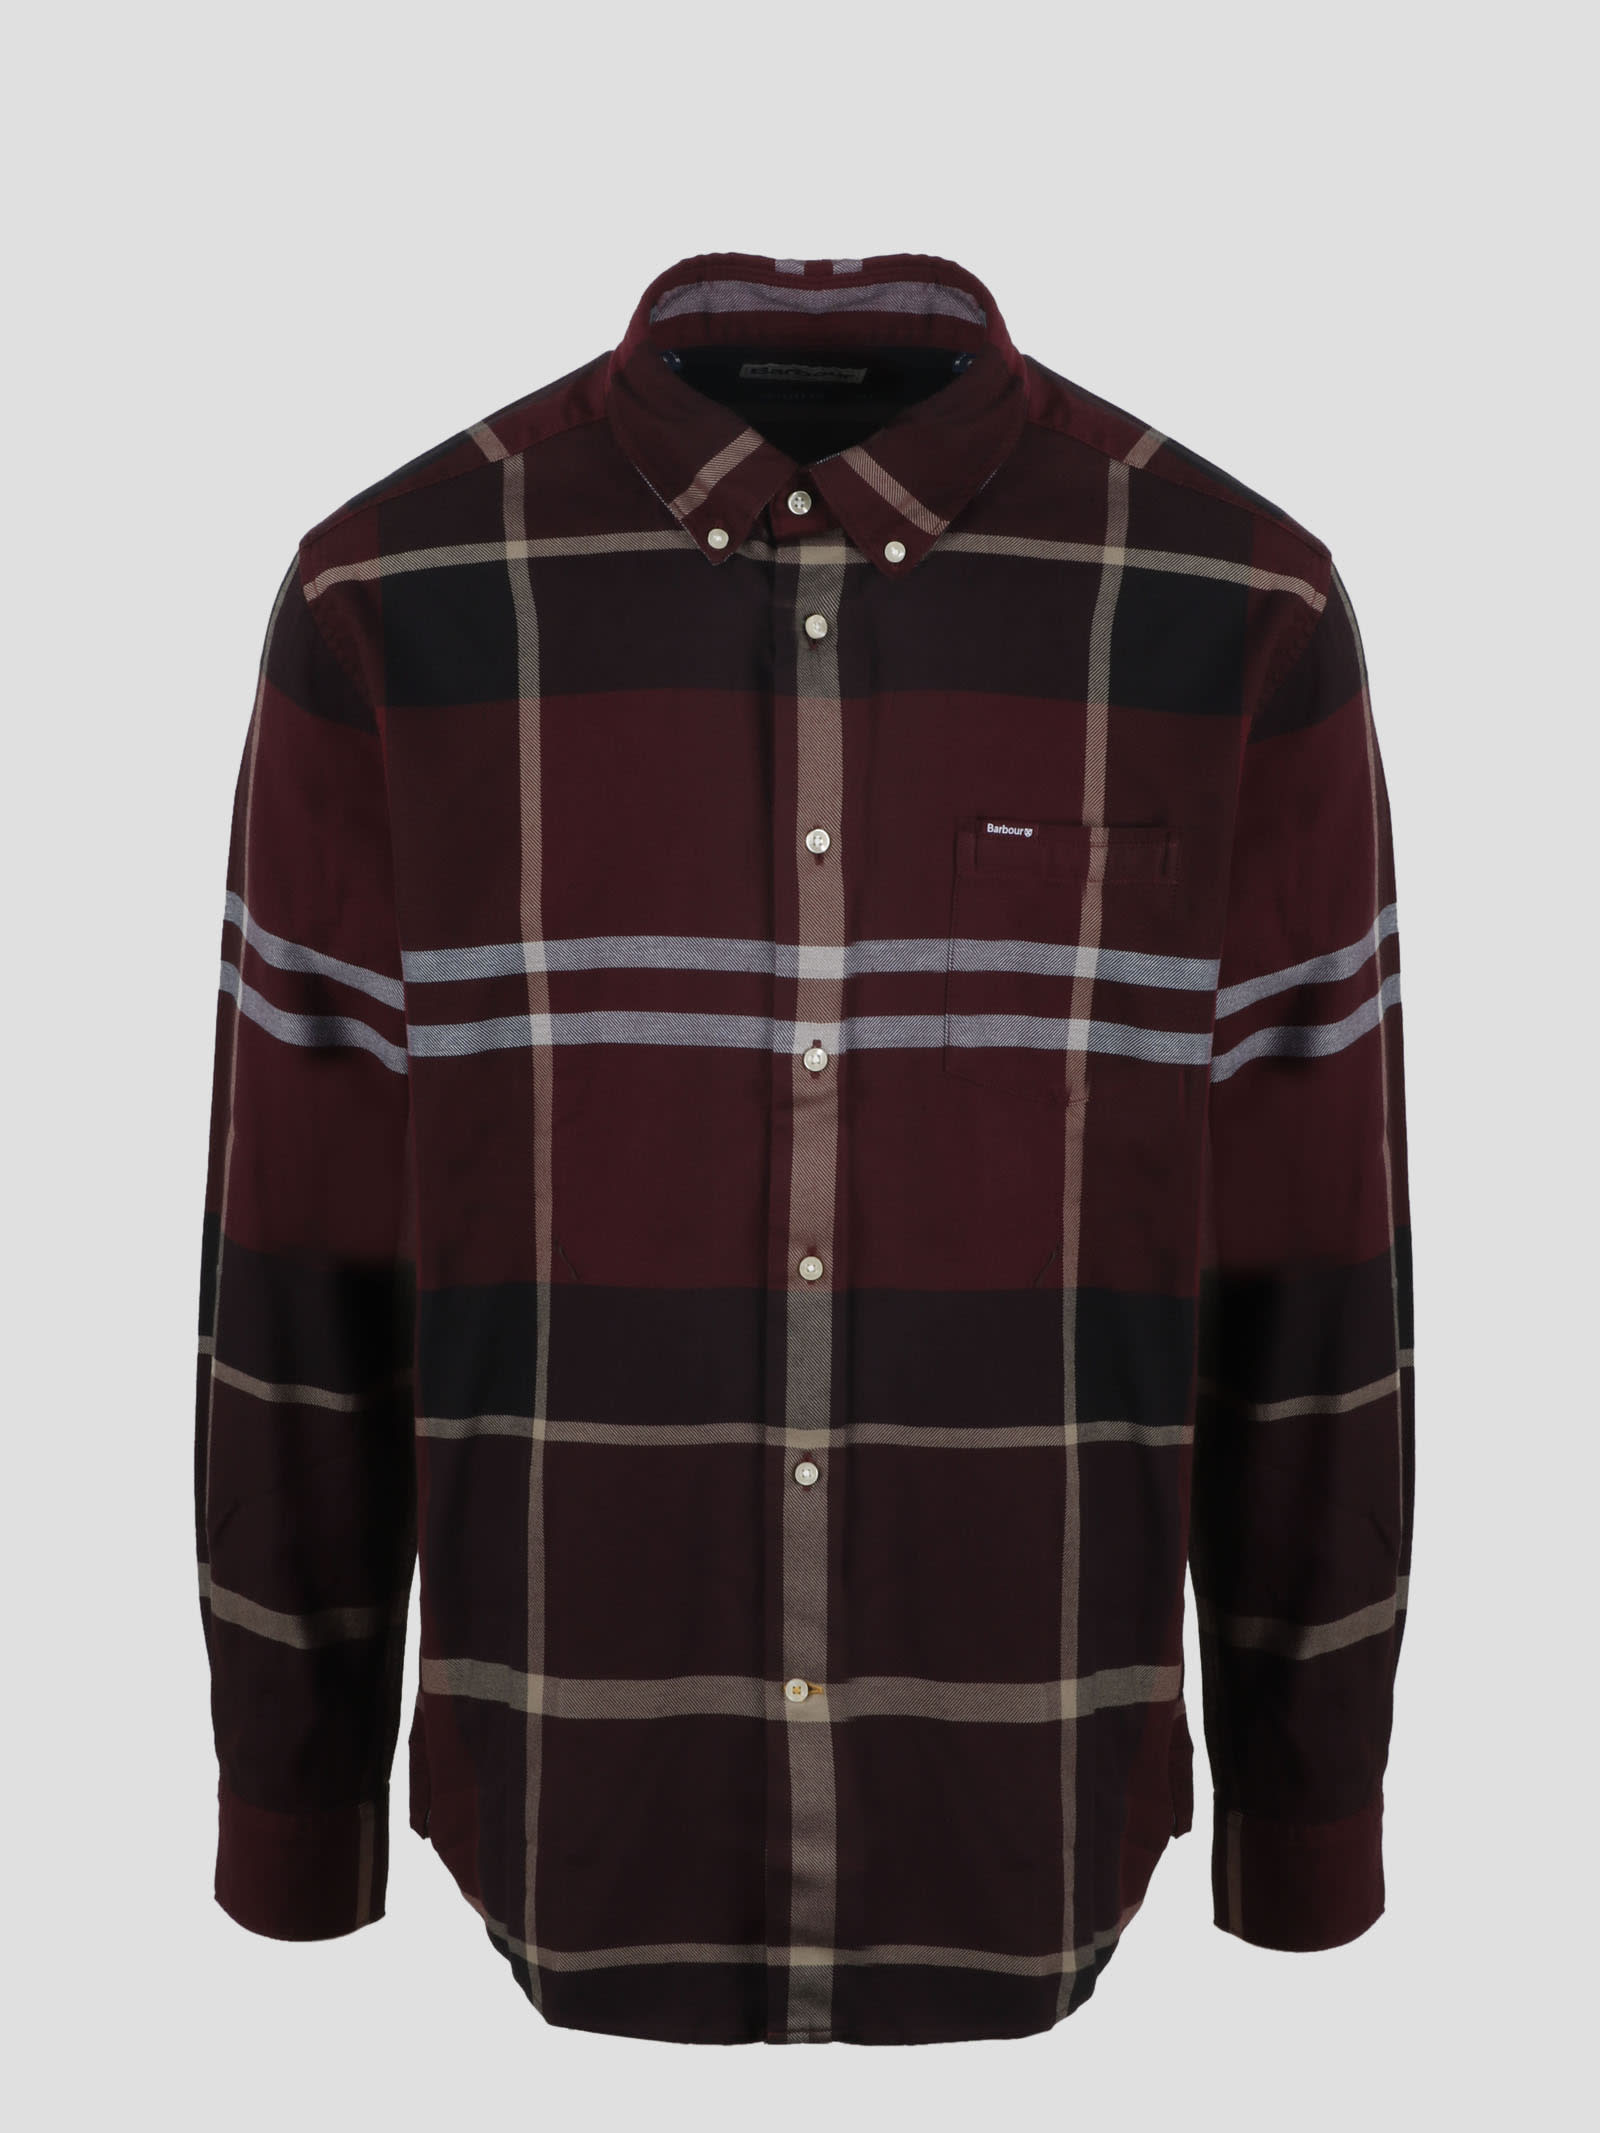 Barbour Dunoon Shirt | italist, ALWAYS LIKE A SALE